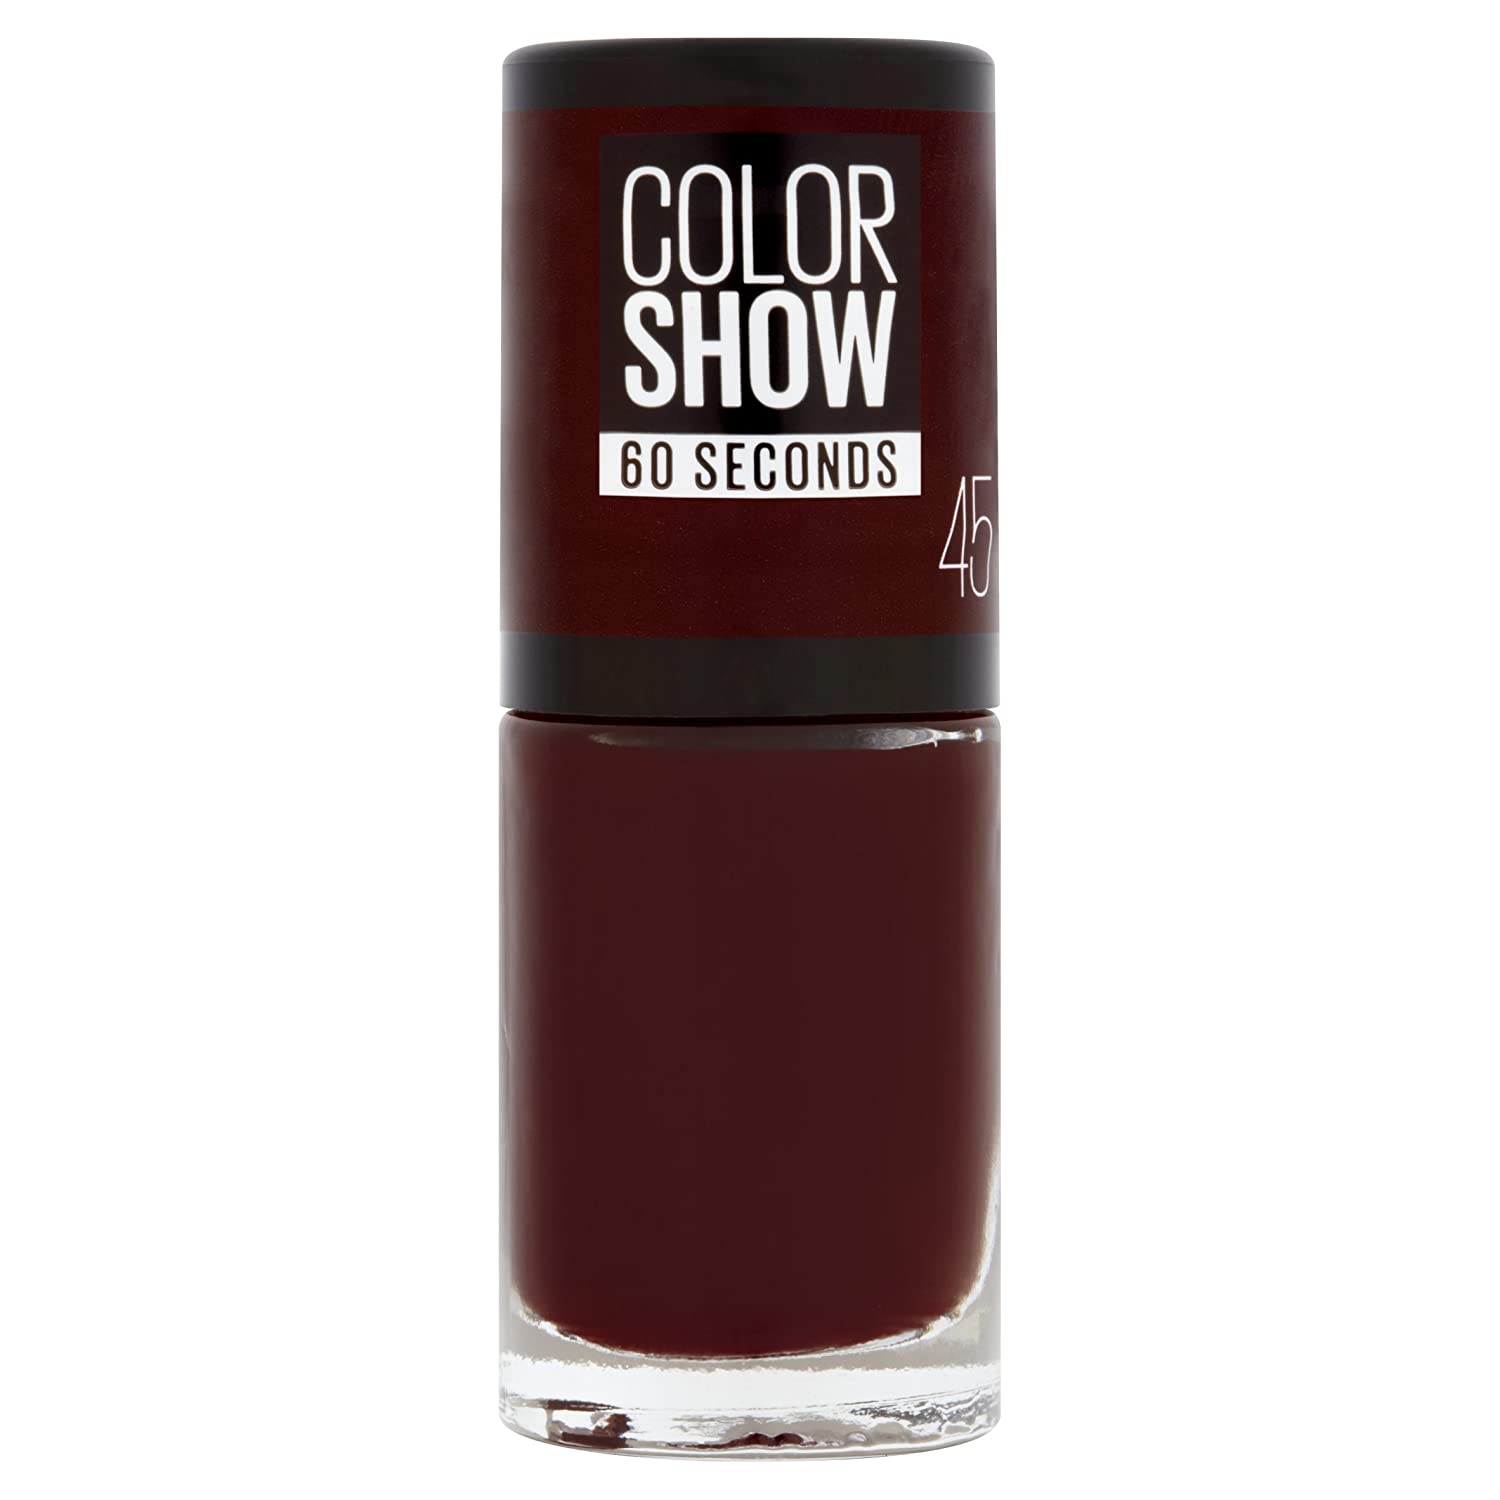 Gemey Maybelline Colorshow Nail Polish 45 Cherry On The Cake 7ml, ‎red